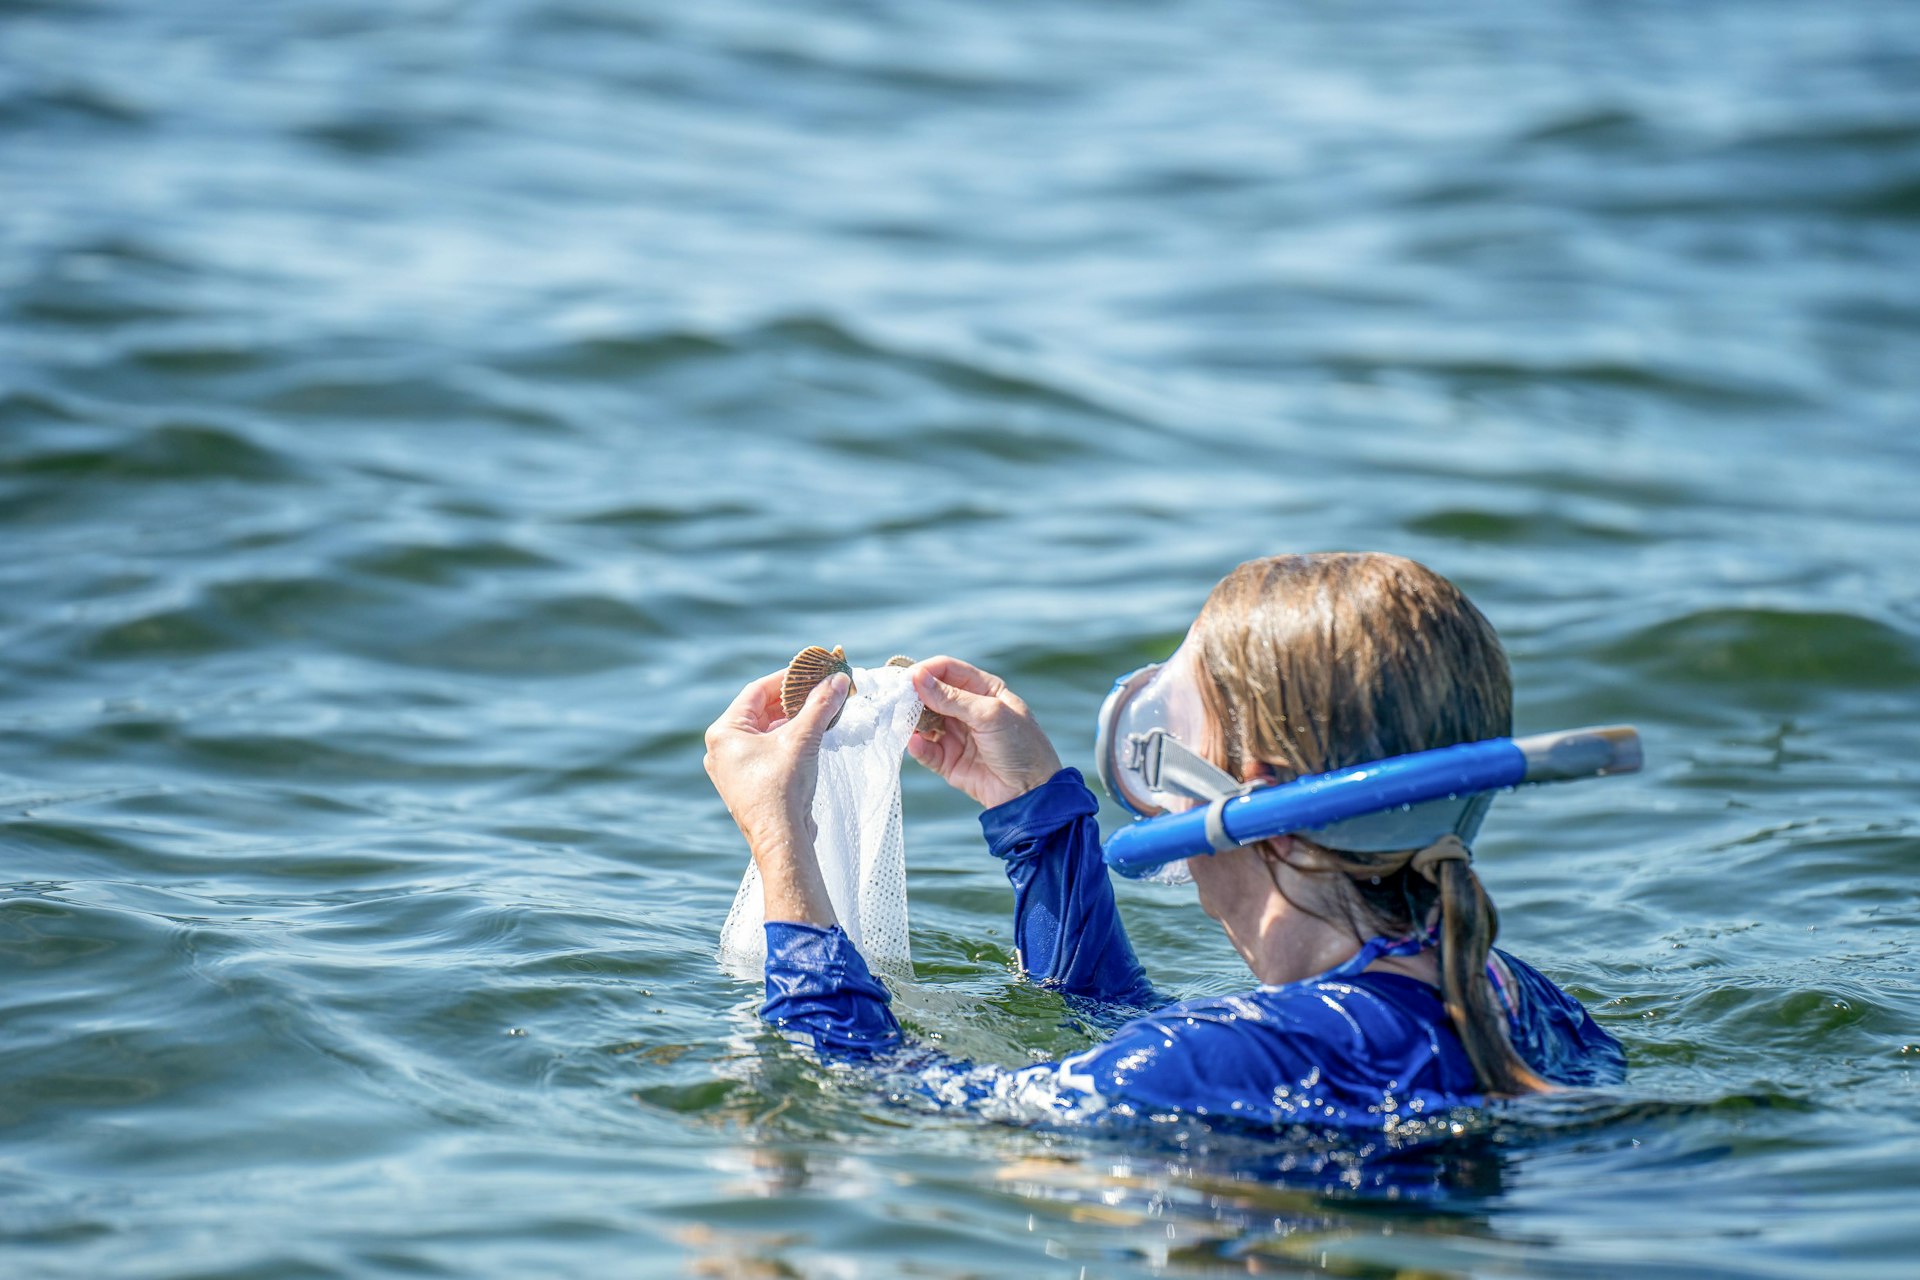 A female snorkeler putting a scallop in a catch bag on the water's surface